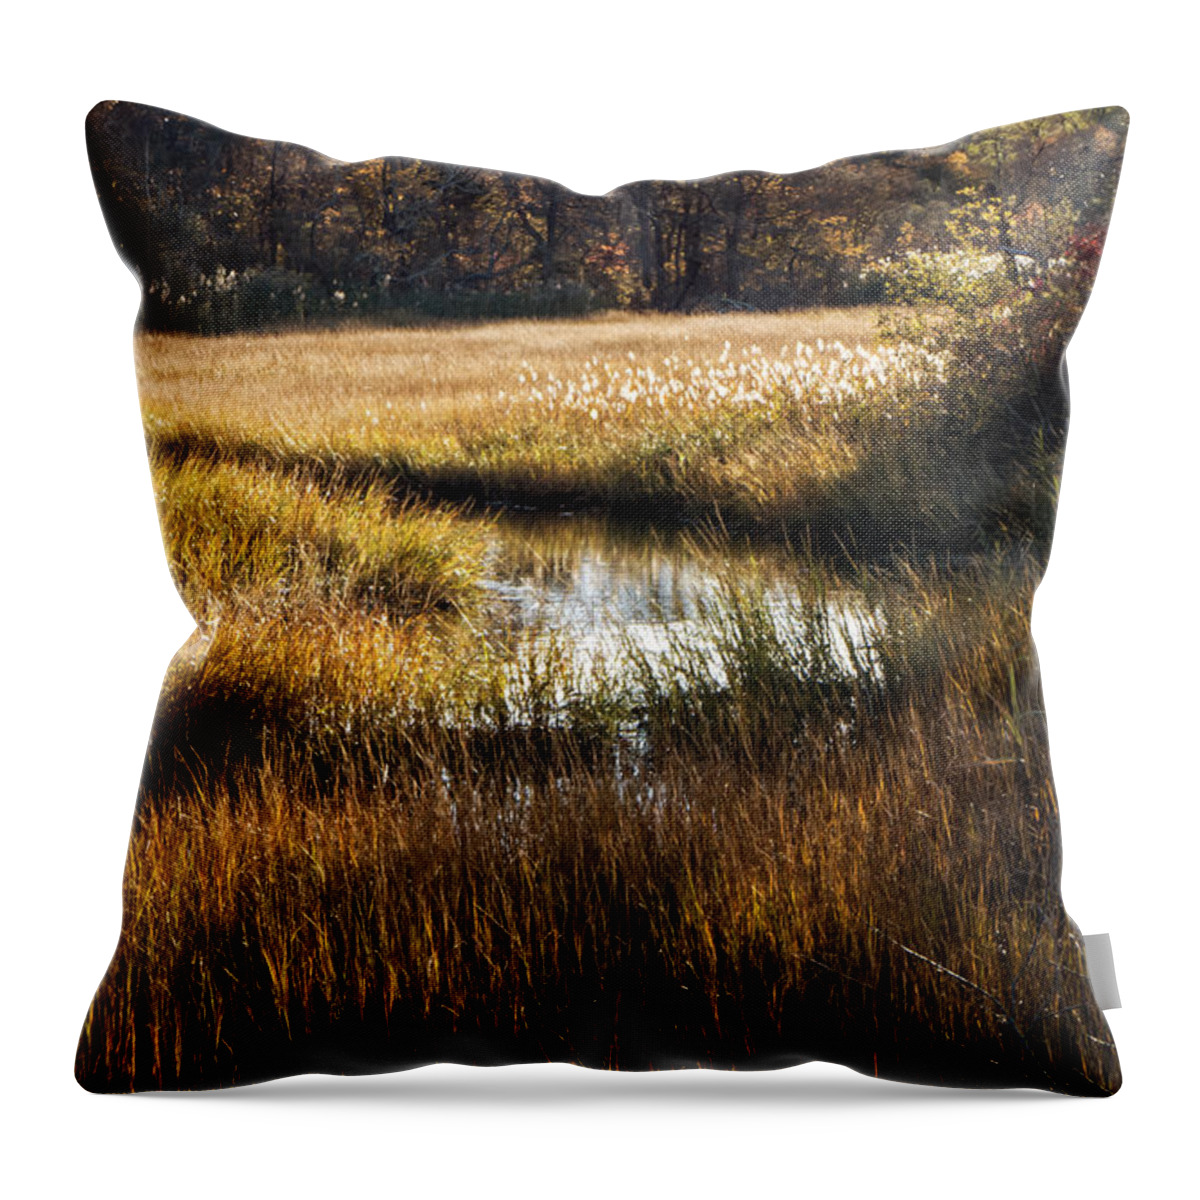 Cape Cod Throw Pillow featuring the photograph Cape Cod Marsh by Frank Winters